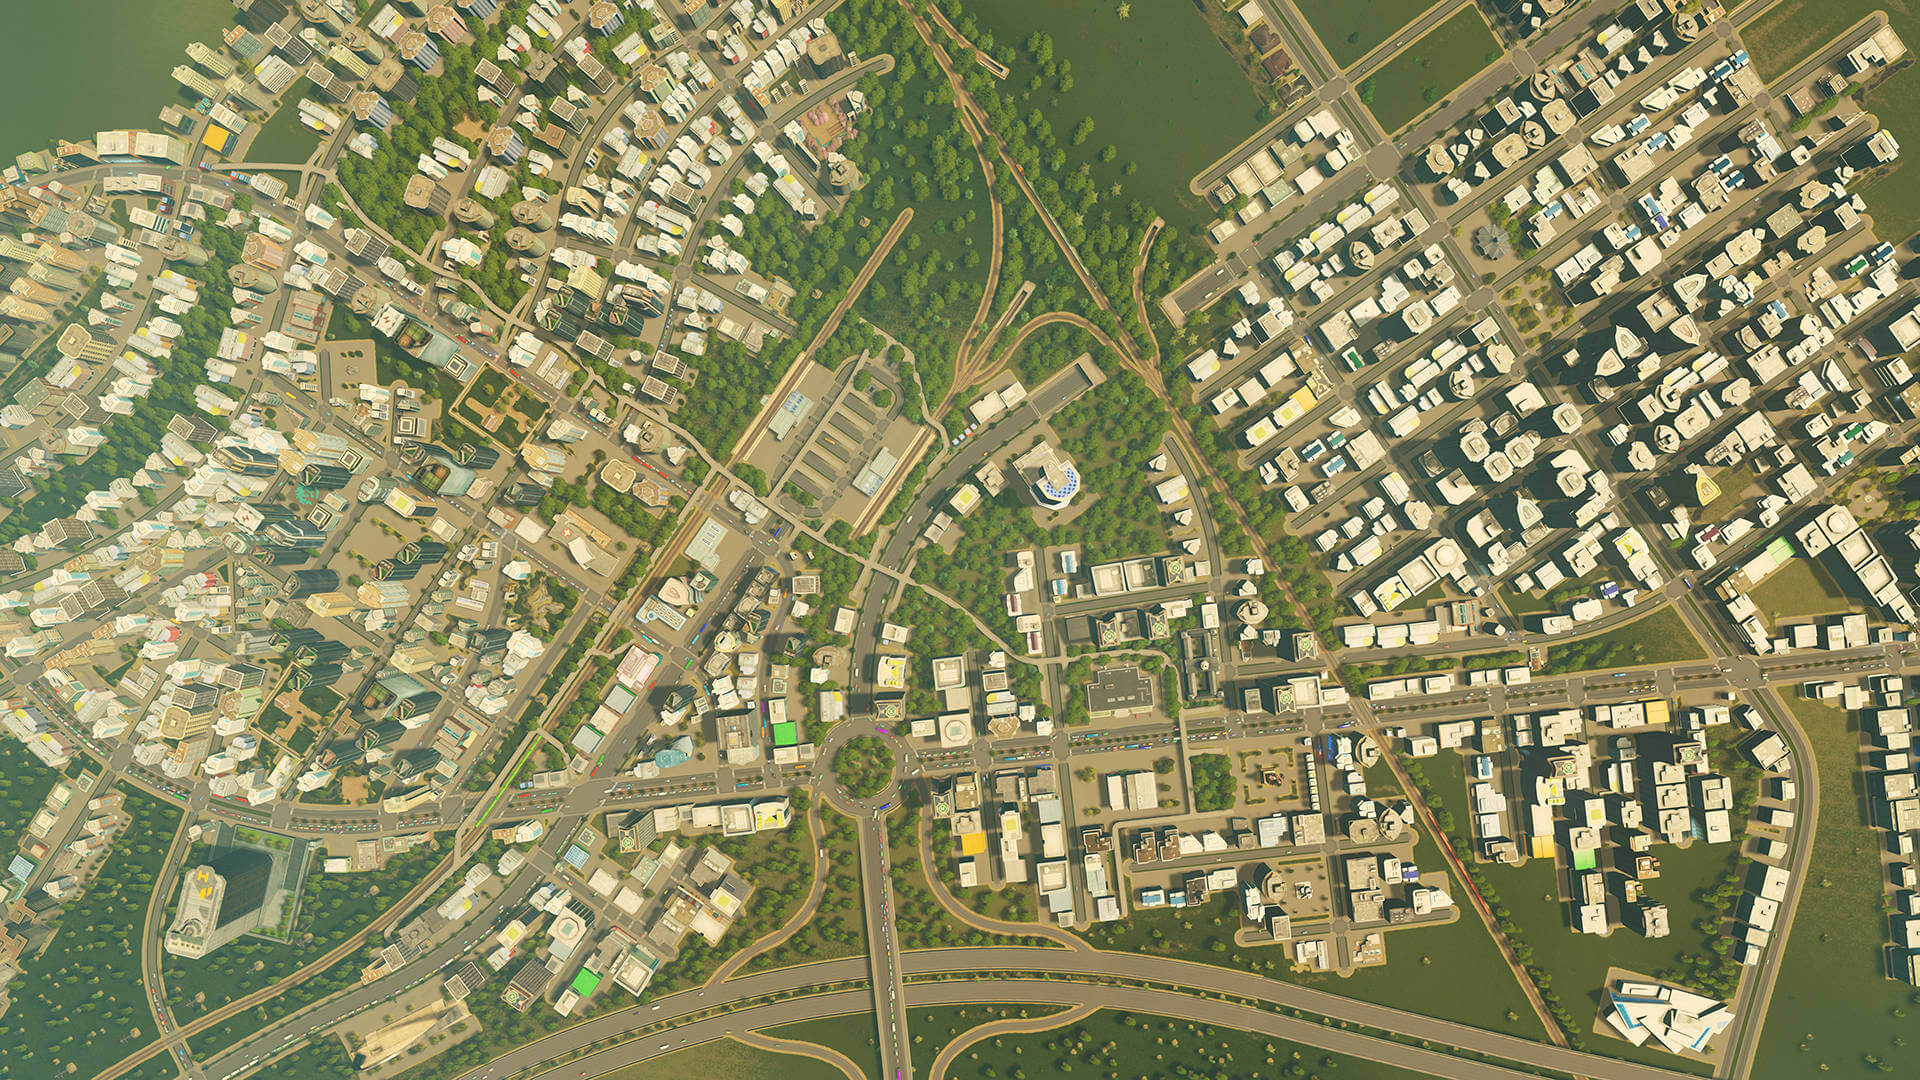 Cities Skylines Indir + Cracked PC Game Torrent Free Download